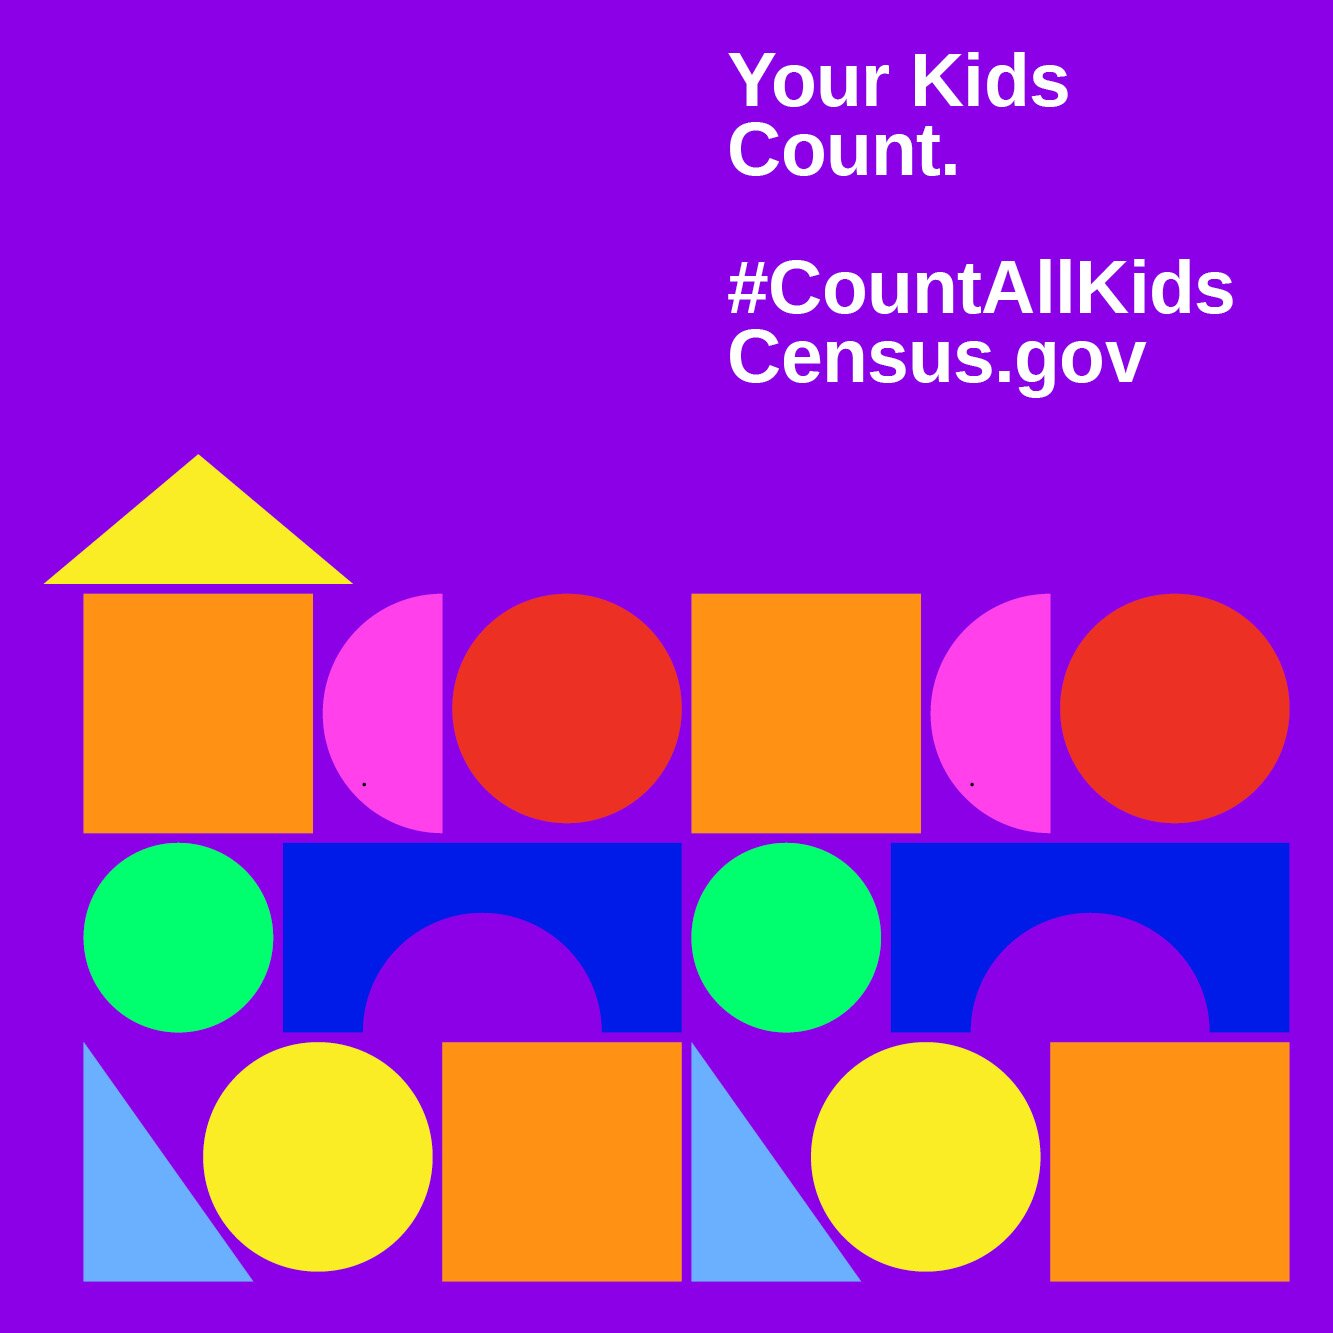 Your Kids Count